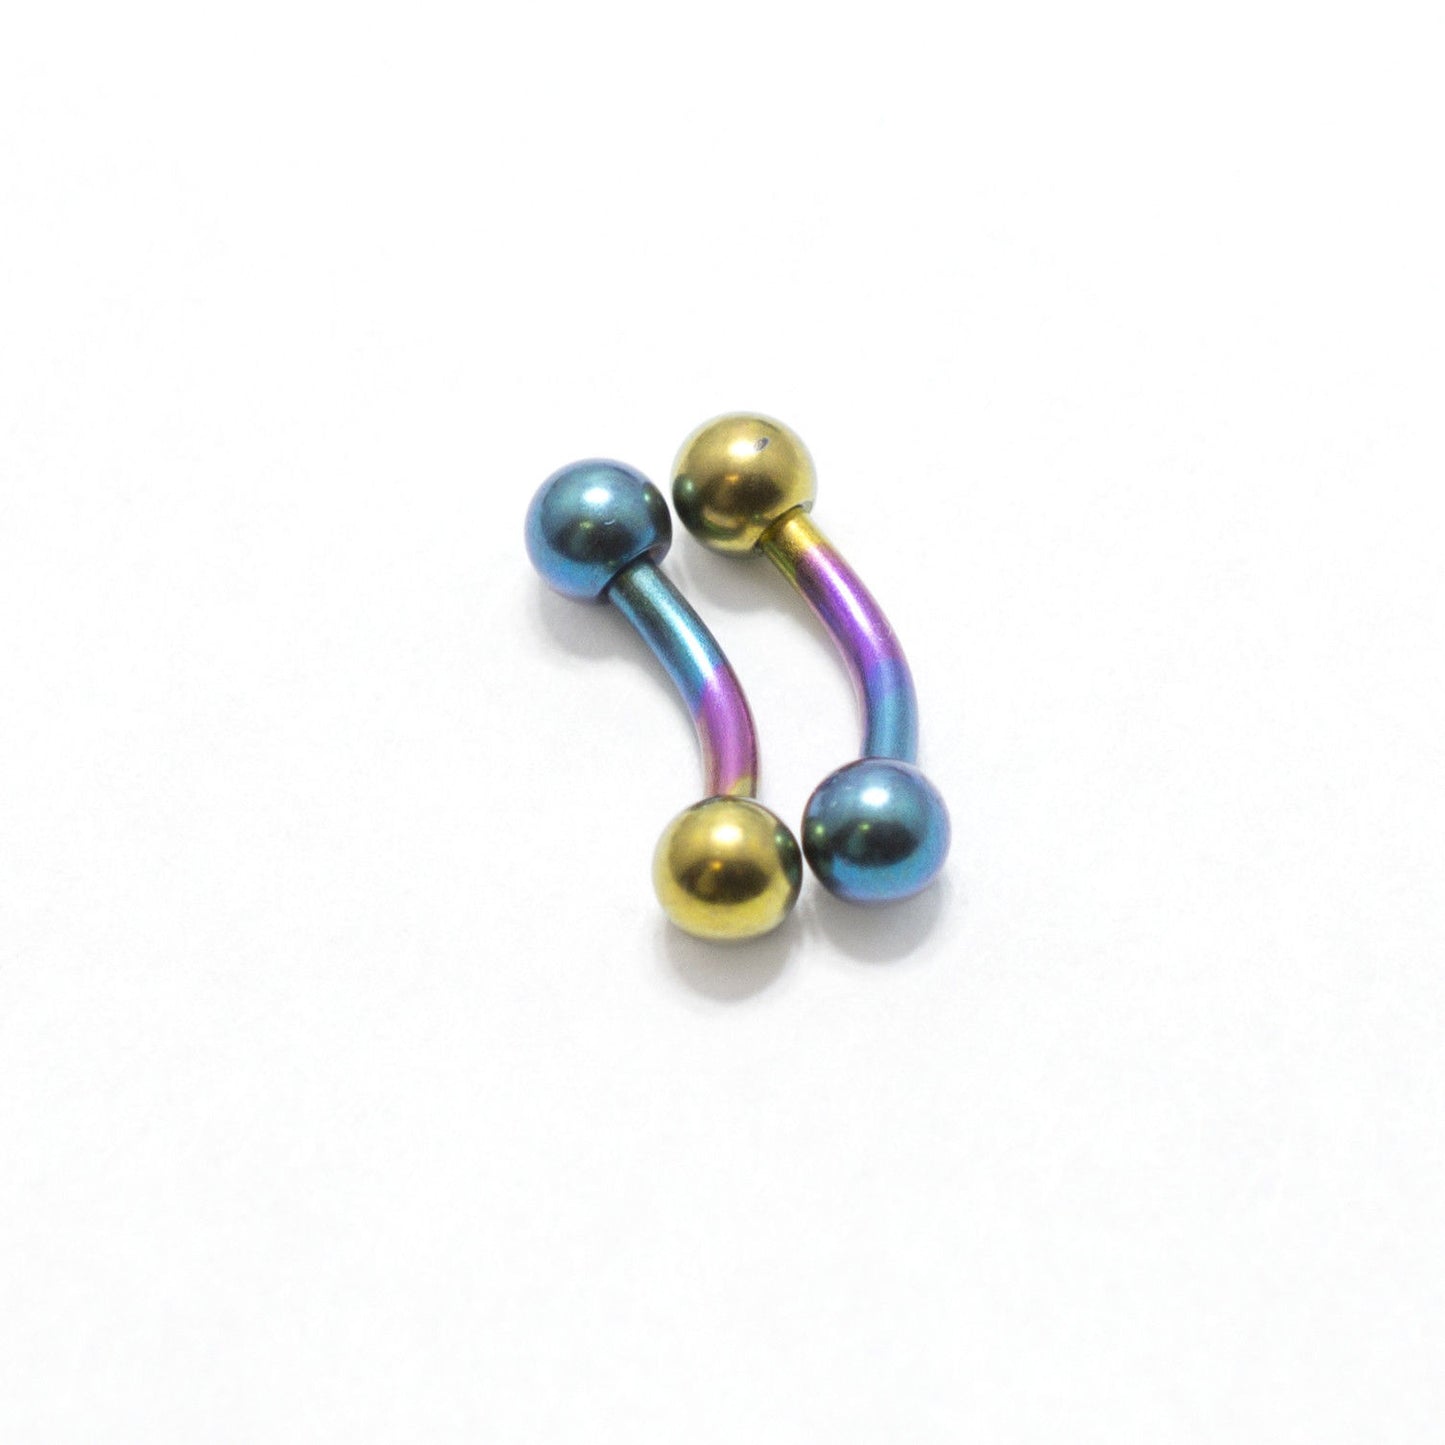 Pair of Curved Barbells Micro Size 16G - 1/4" w/ 3mm Ball Eyebrow Rook Tragus